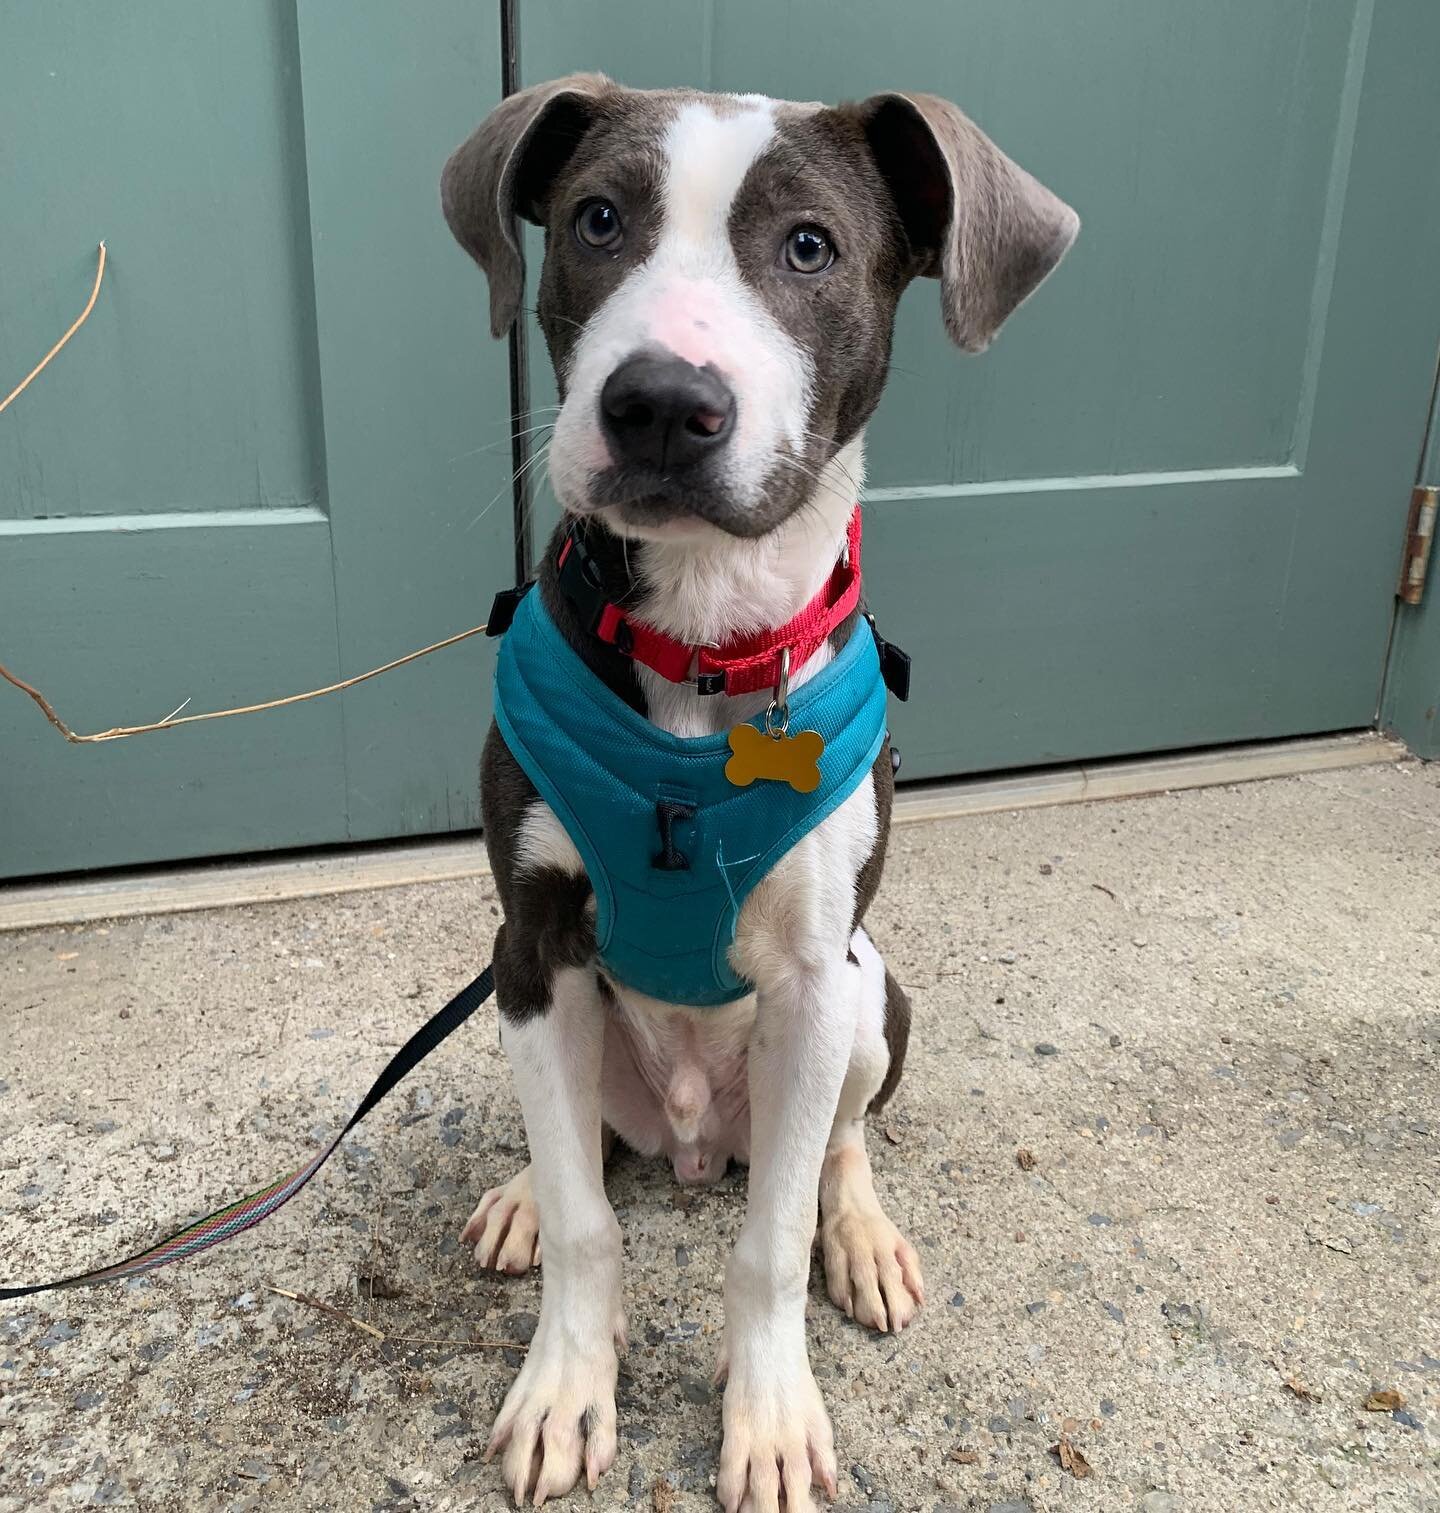 PUPDATE - ADOPTED Meet Nugget! 💙

This ADORABLE 7 month old pointer mix is literally fabulous. He is super smart and very well trained. You can hardly believe he's a puppy!

His foster mom says:
&quot;Nugget is a very sweet and gentle boy. He seems 